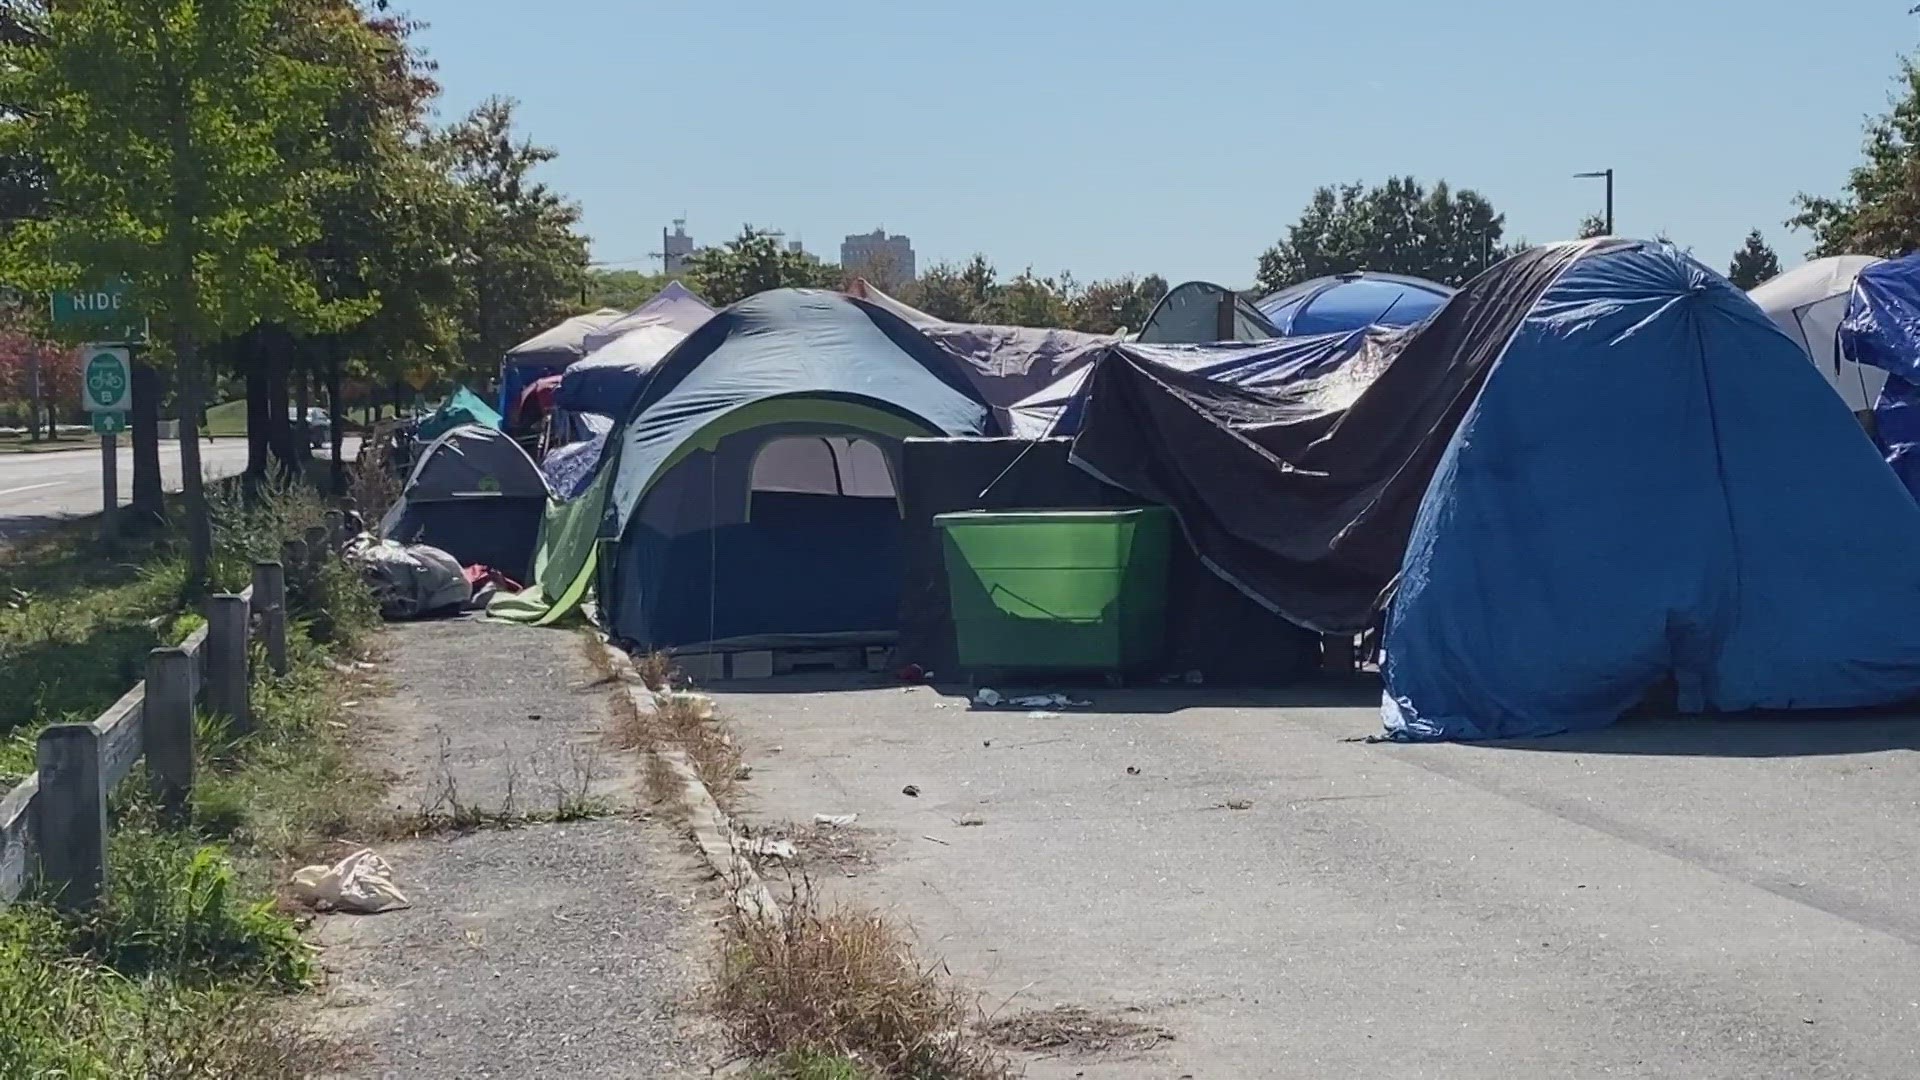 Residents of the Marginal Way homeless encampment will need to vacate next month.